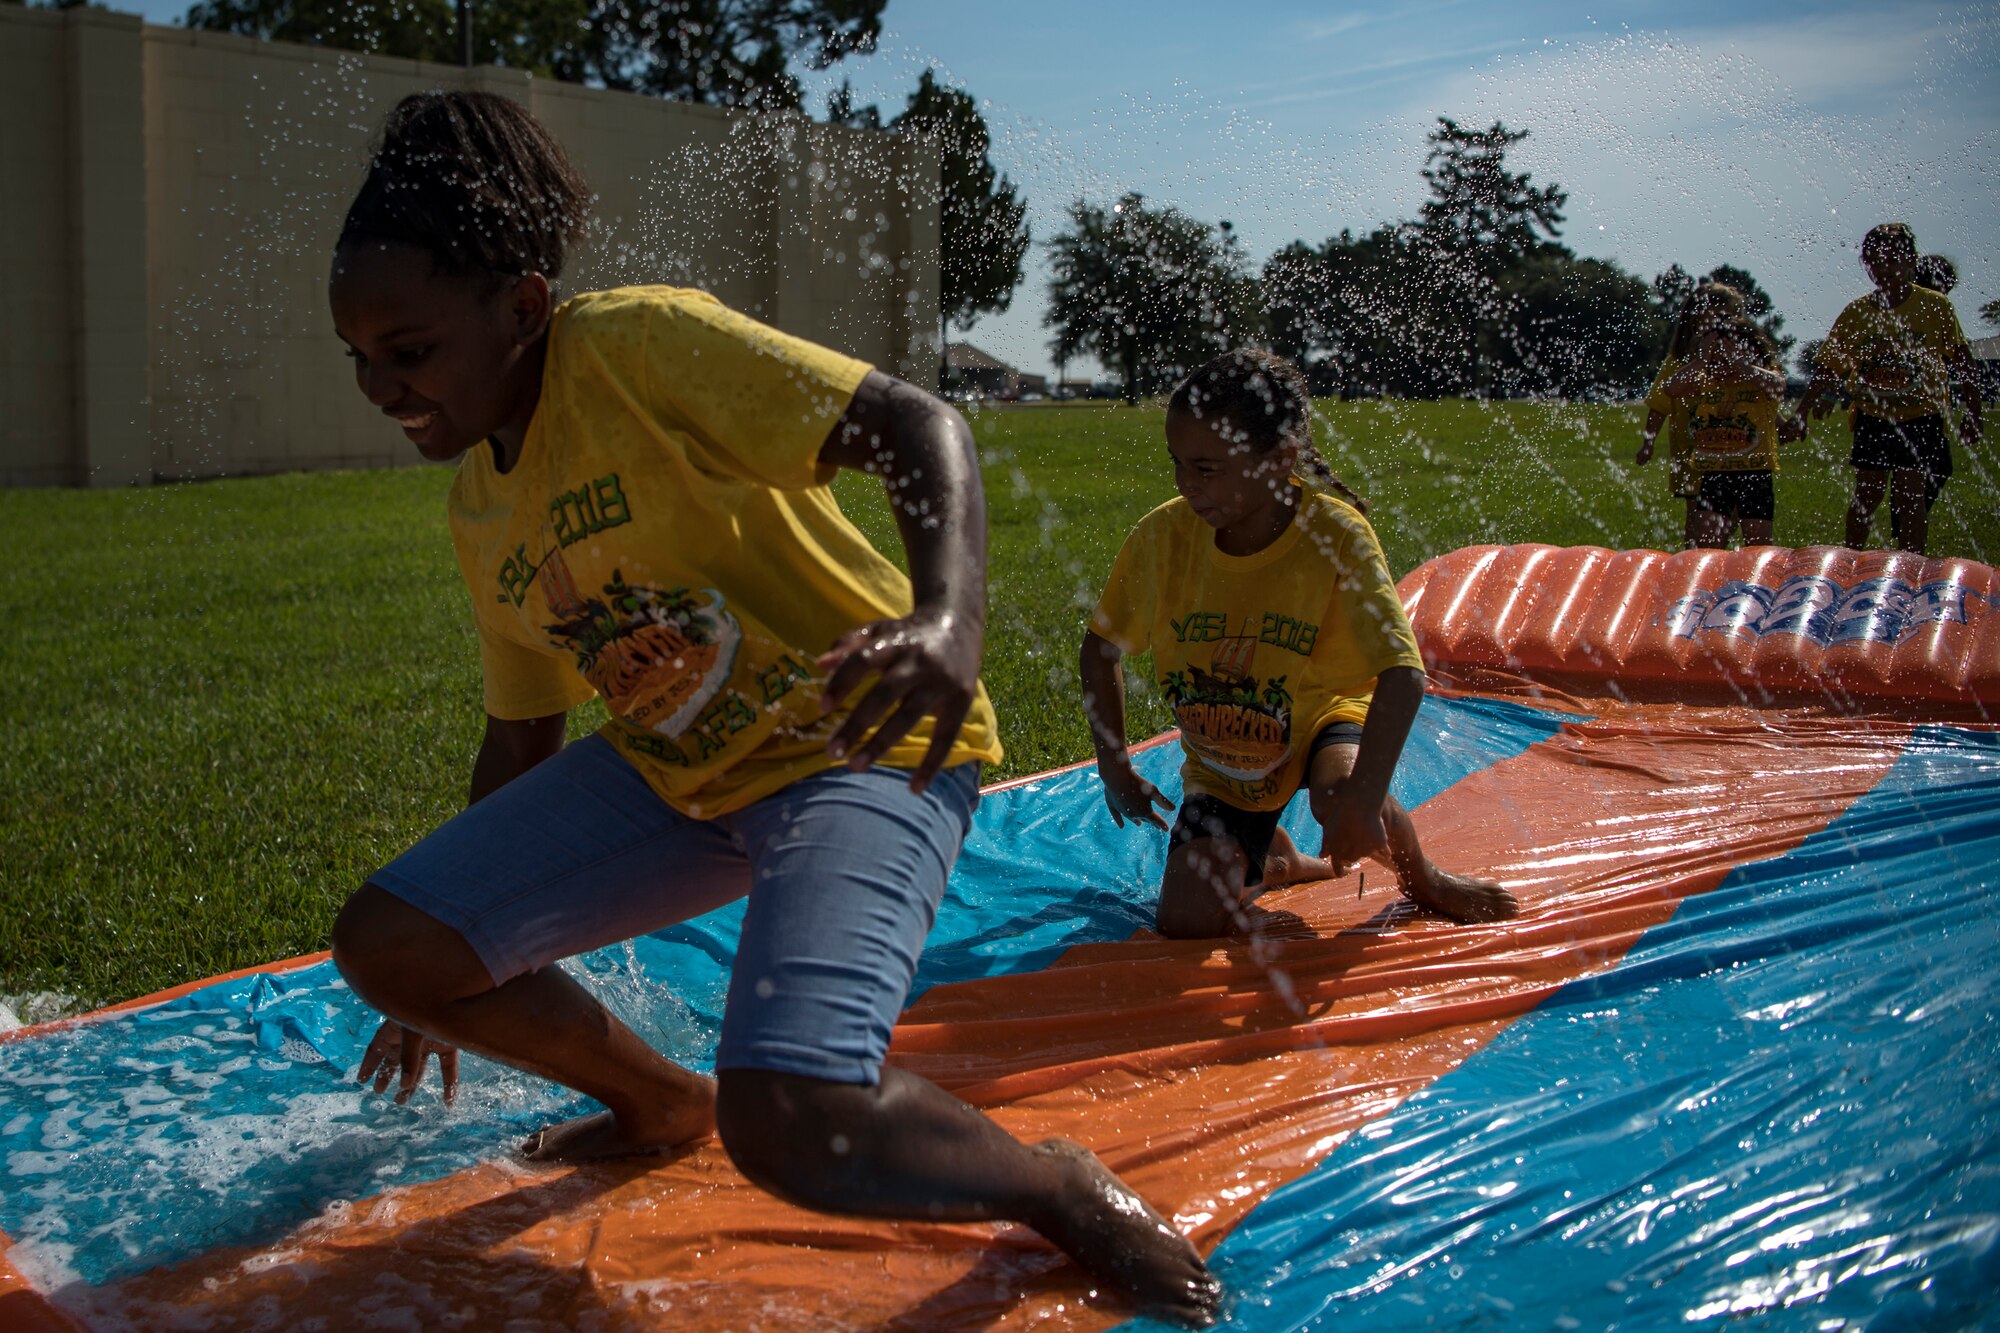 Children slide across a water slide during the base chapel’s Vacation Bible School, June 8, 2018, at Moody Air Force Base, Ga. VBS is designed to assist children in building resiliency to the stressors many military families face. More than 95 children and 65 volunteers attended this year’s VBS. (U.S. Air Force photo by Senior Airman Daniel Snider)